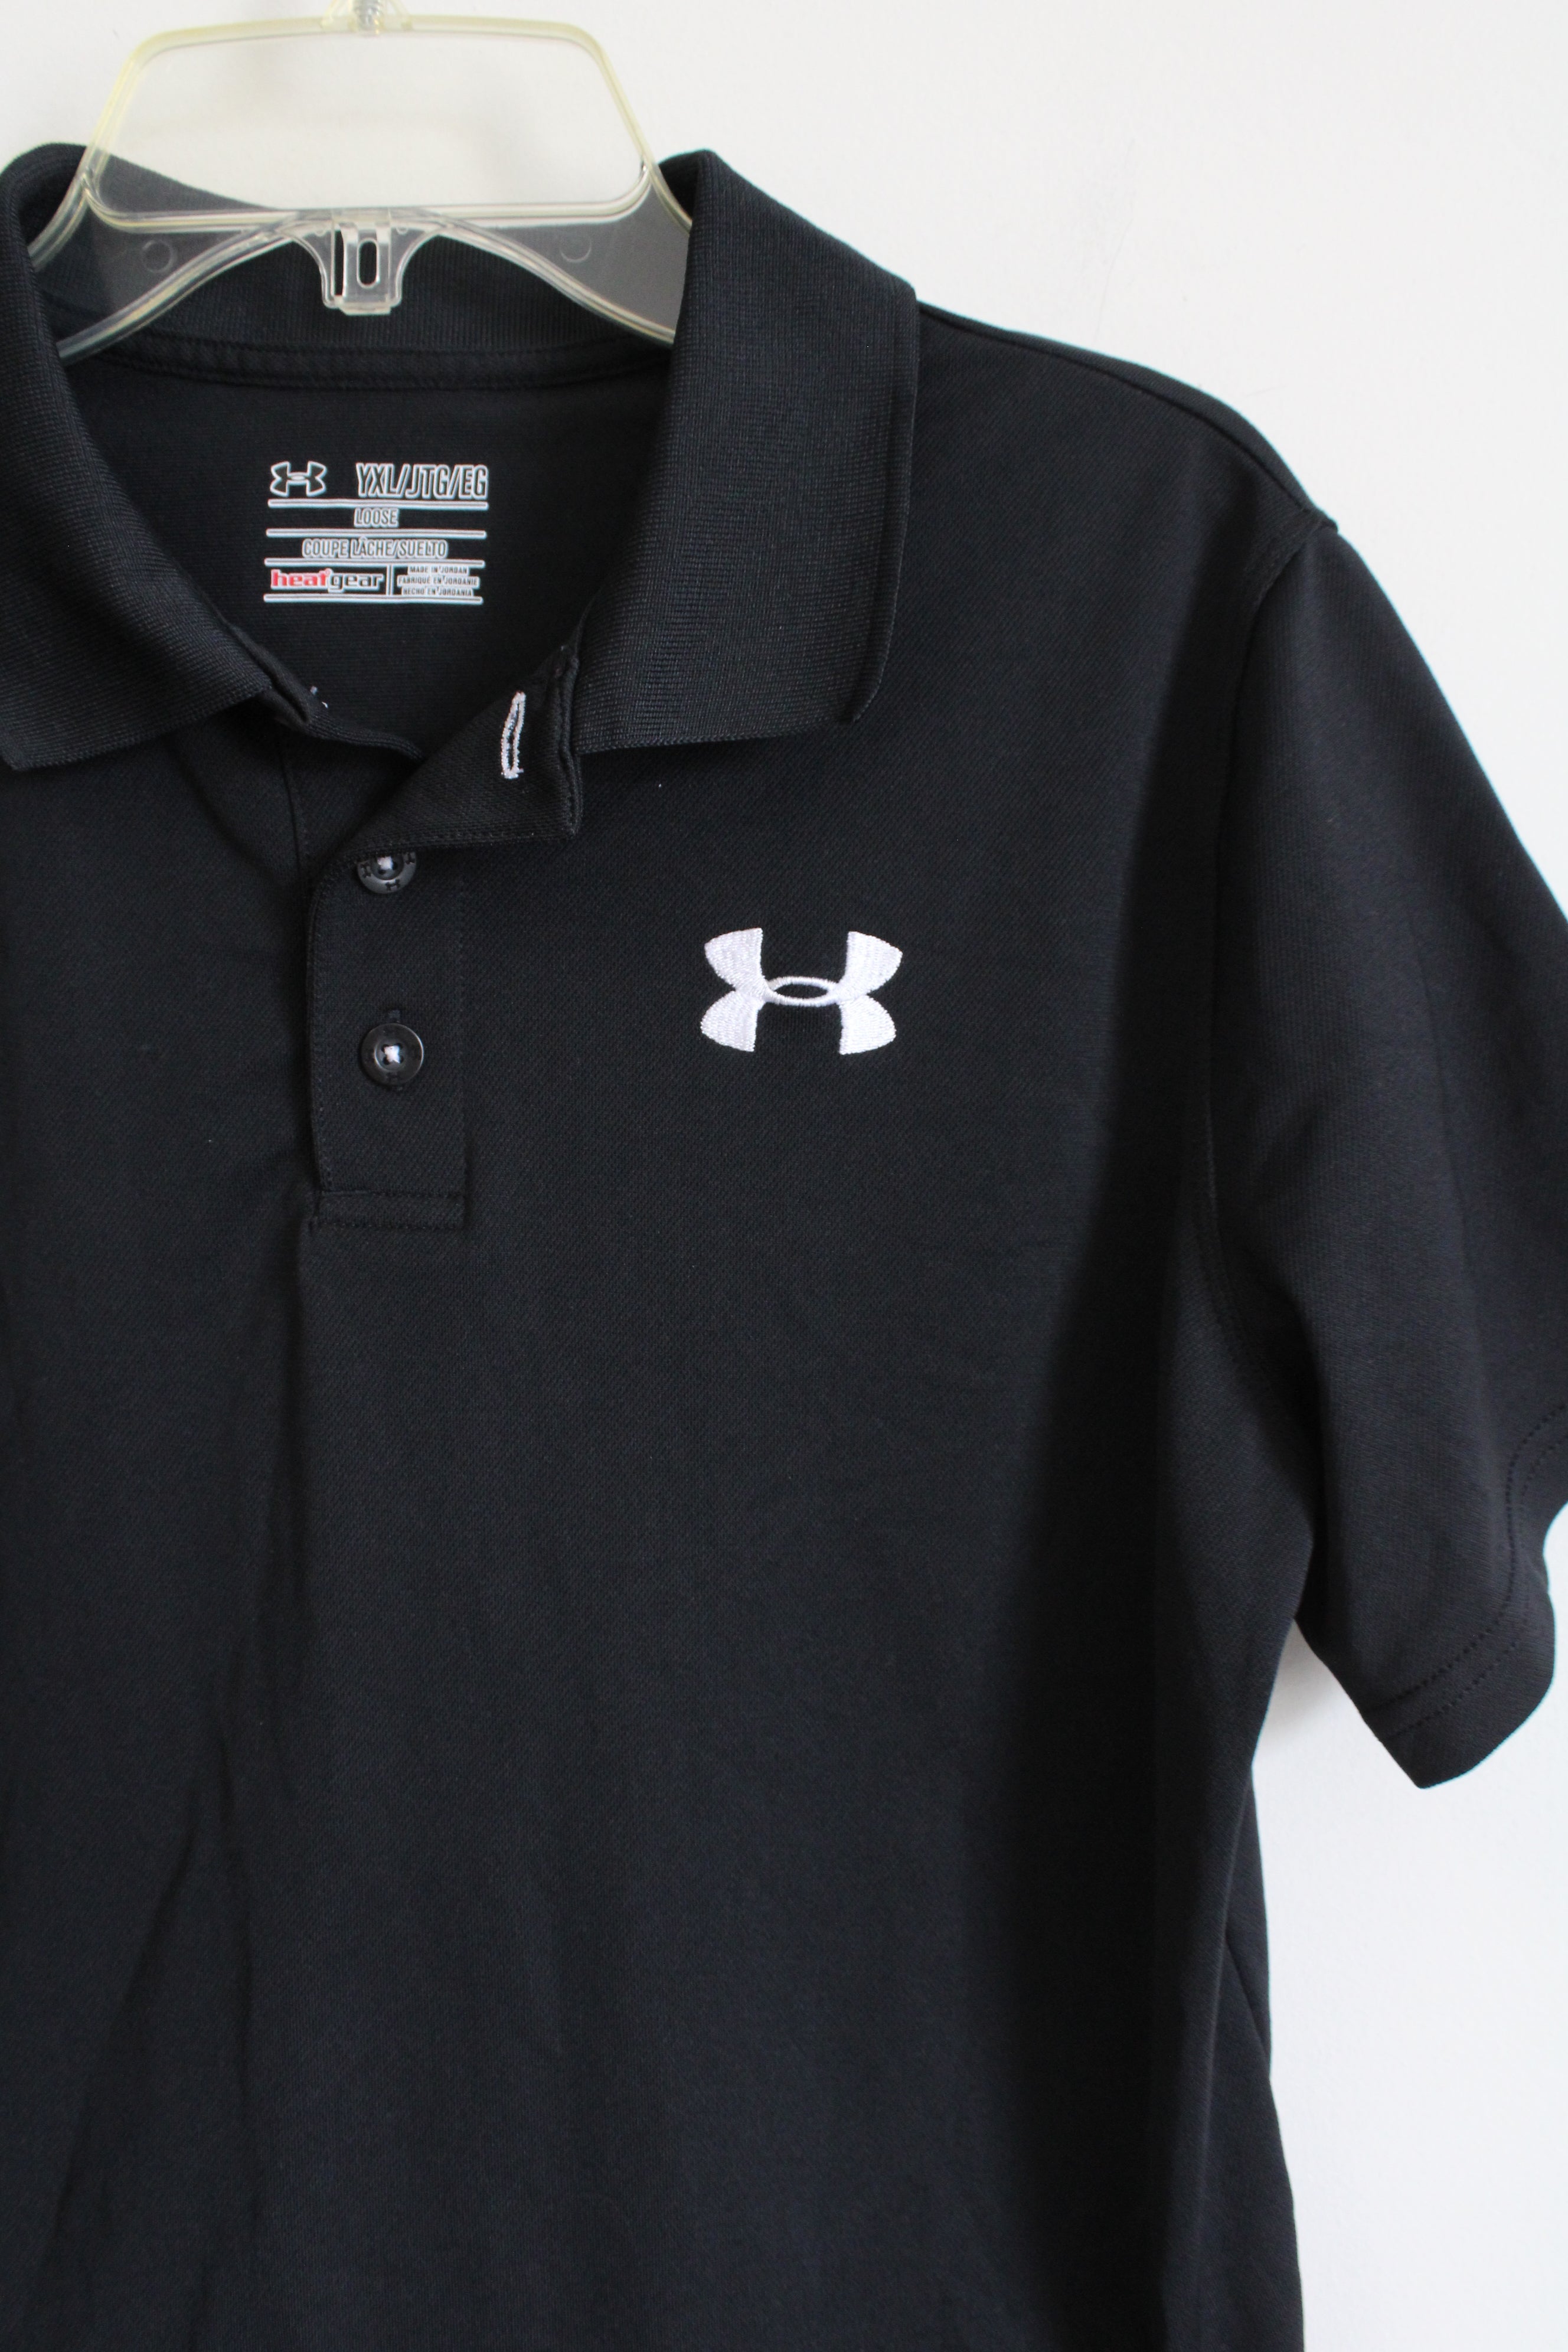 Under Armour Black Polo | Youth XL (18/20)